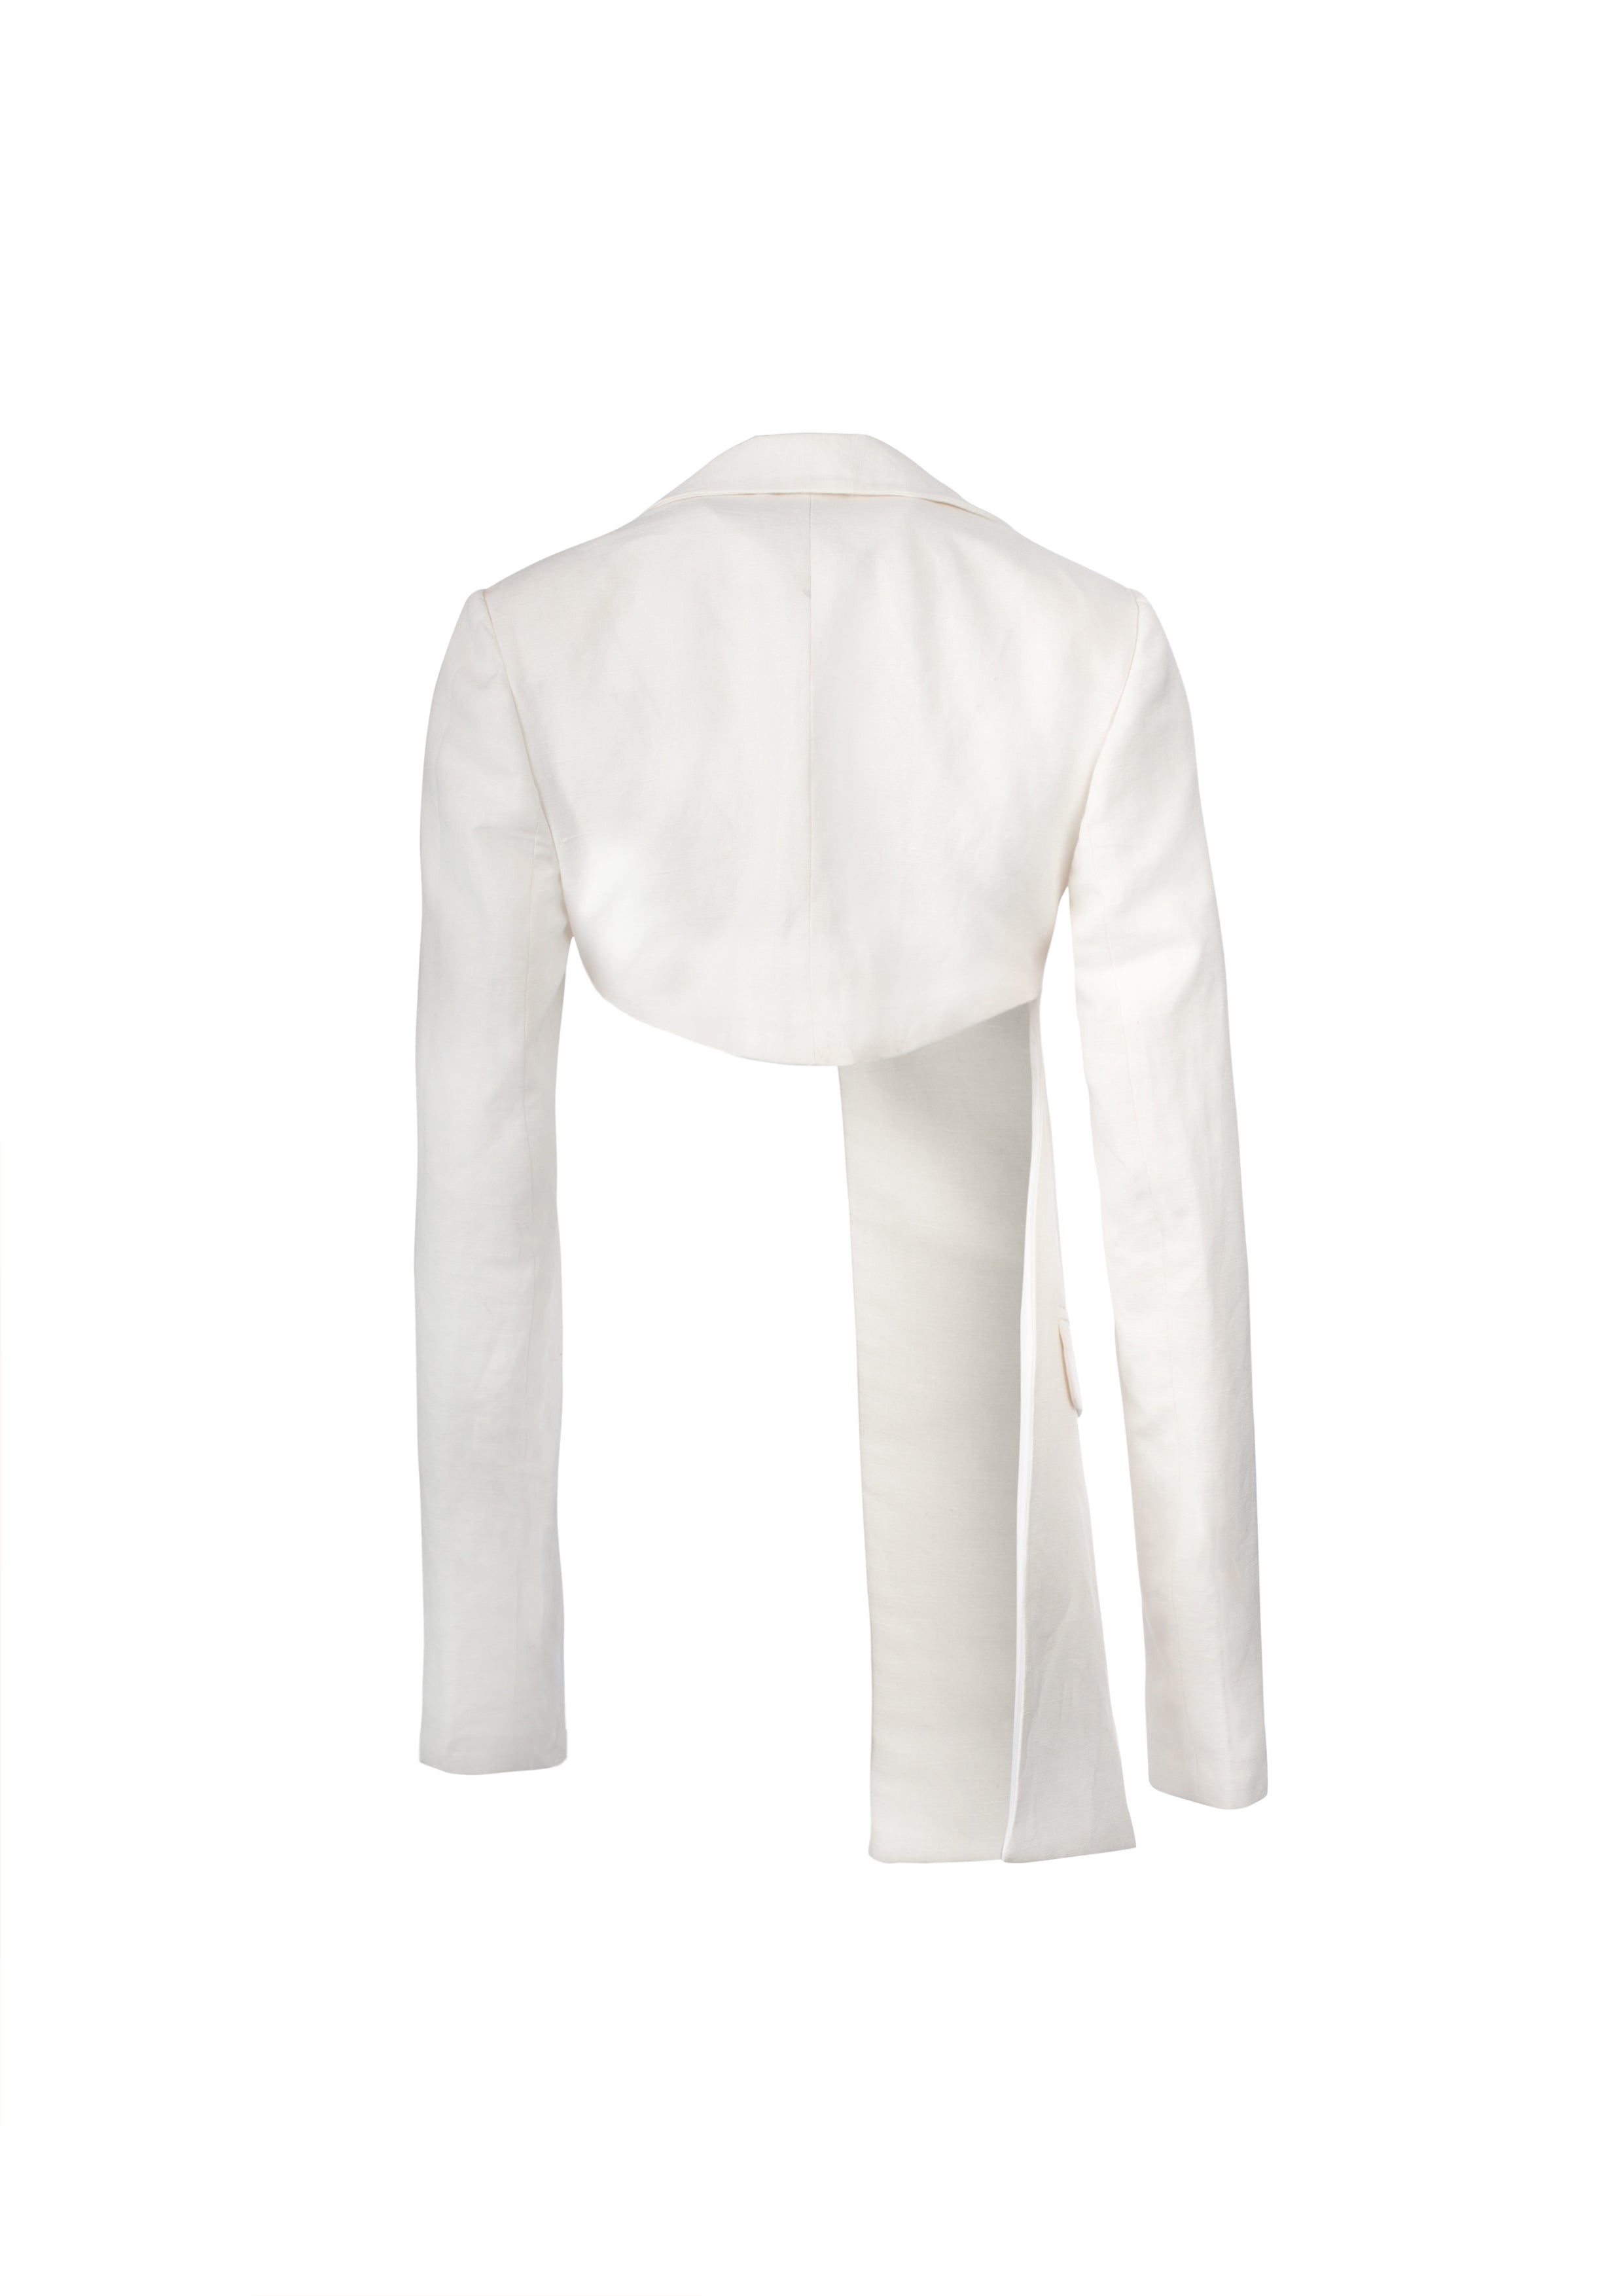 Asymmetrical white linen blazer with oversized shoulders. Cropped back